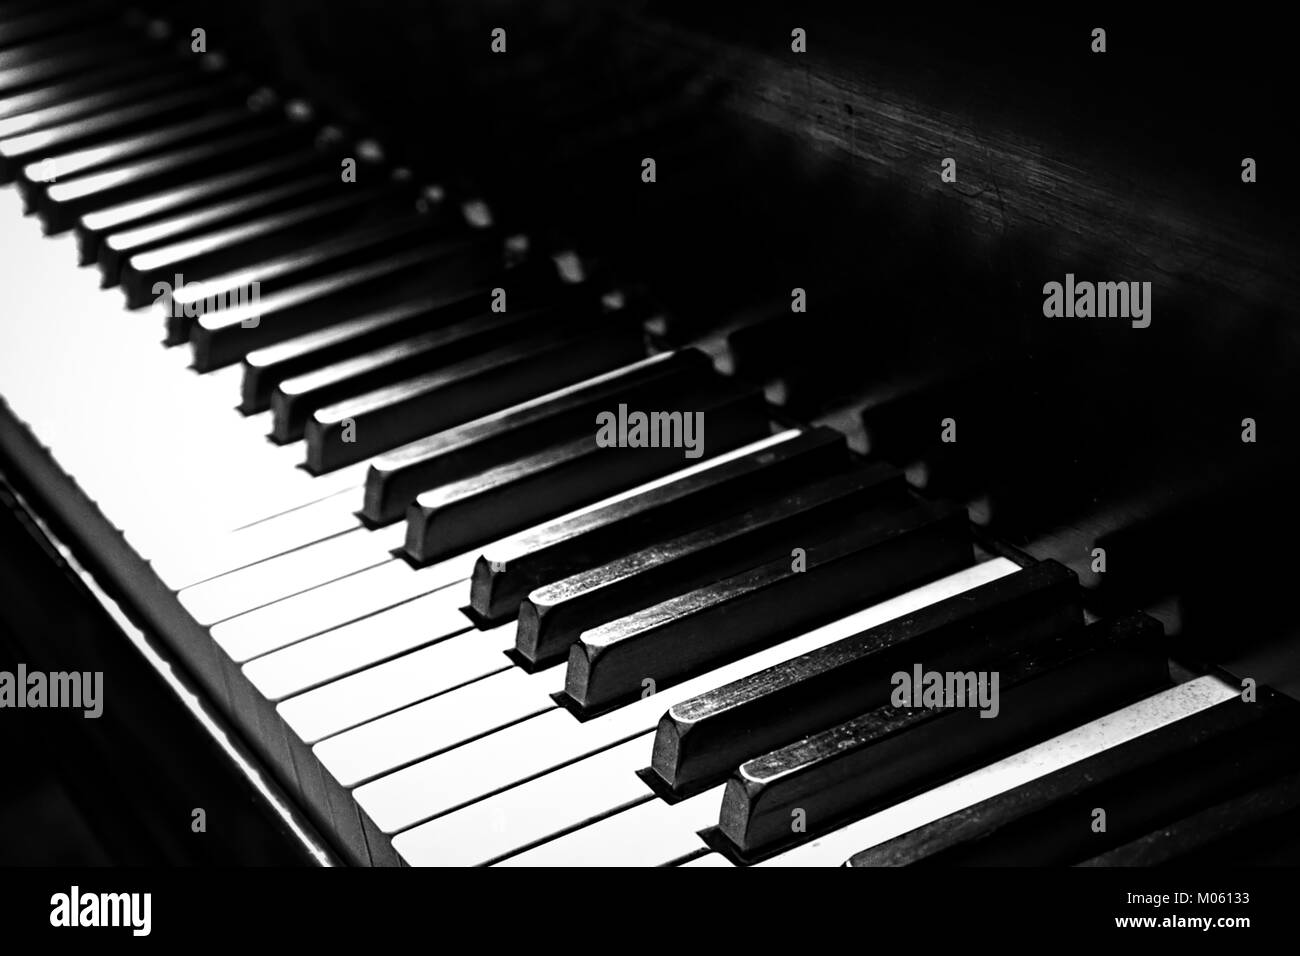 The keys of a old piano set in a black and white film noir look. Stock Photo